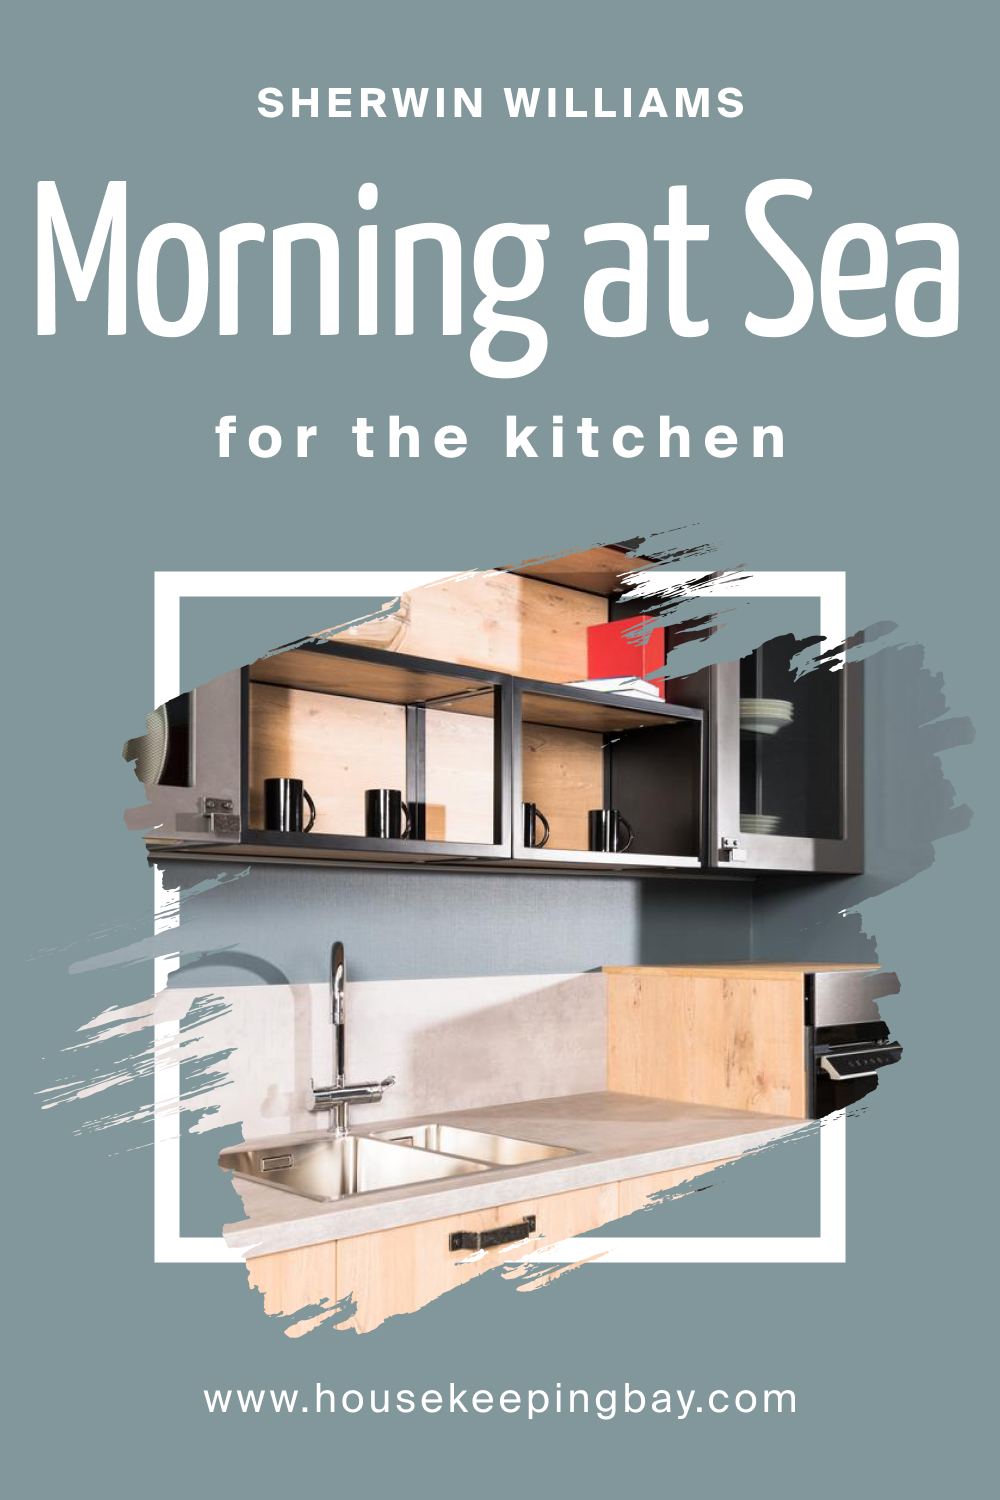 Sherwin Williams. SW 9634 Morning at Sea For the Kitchens